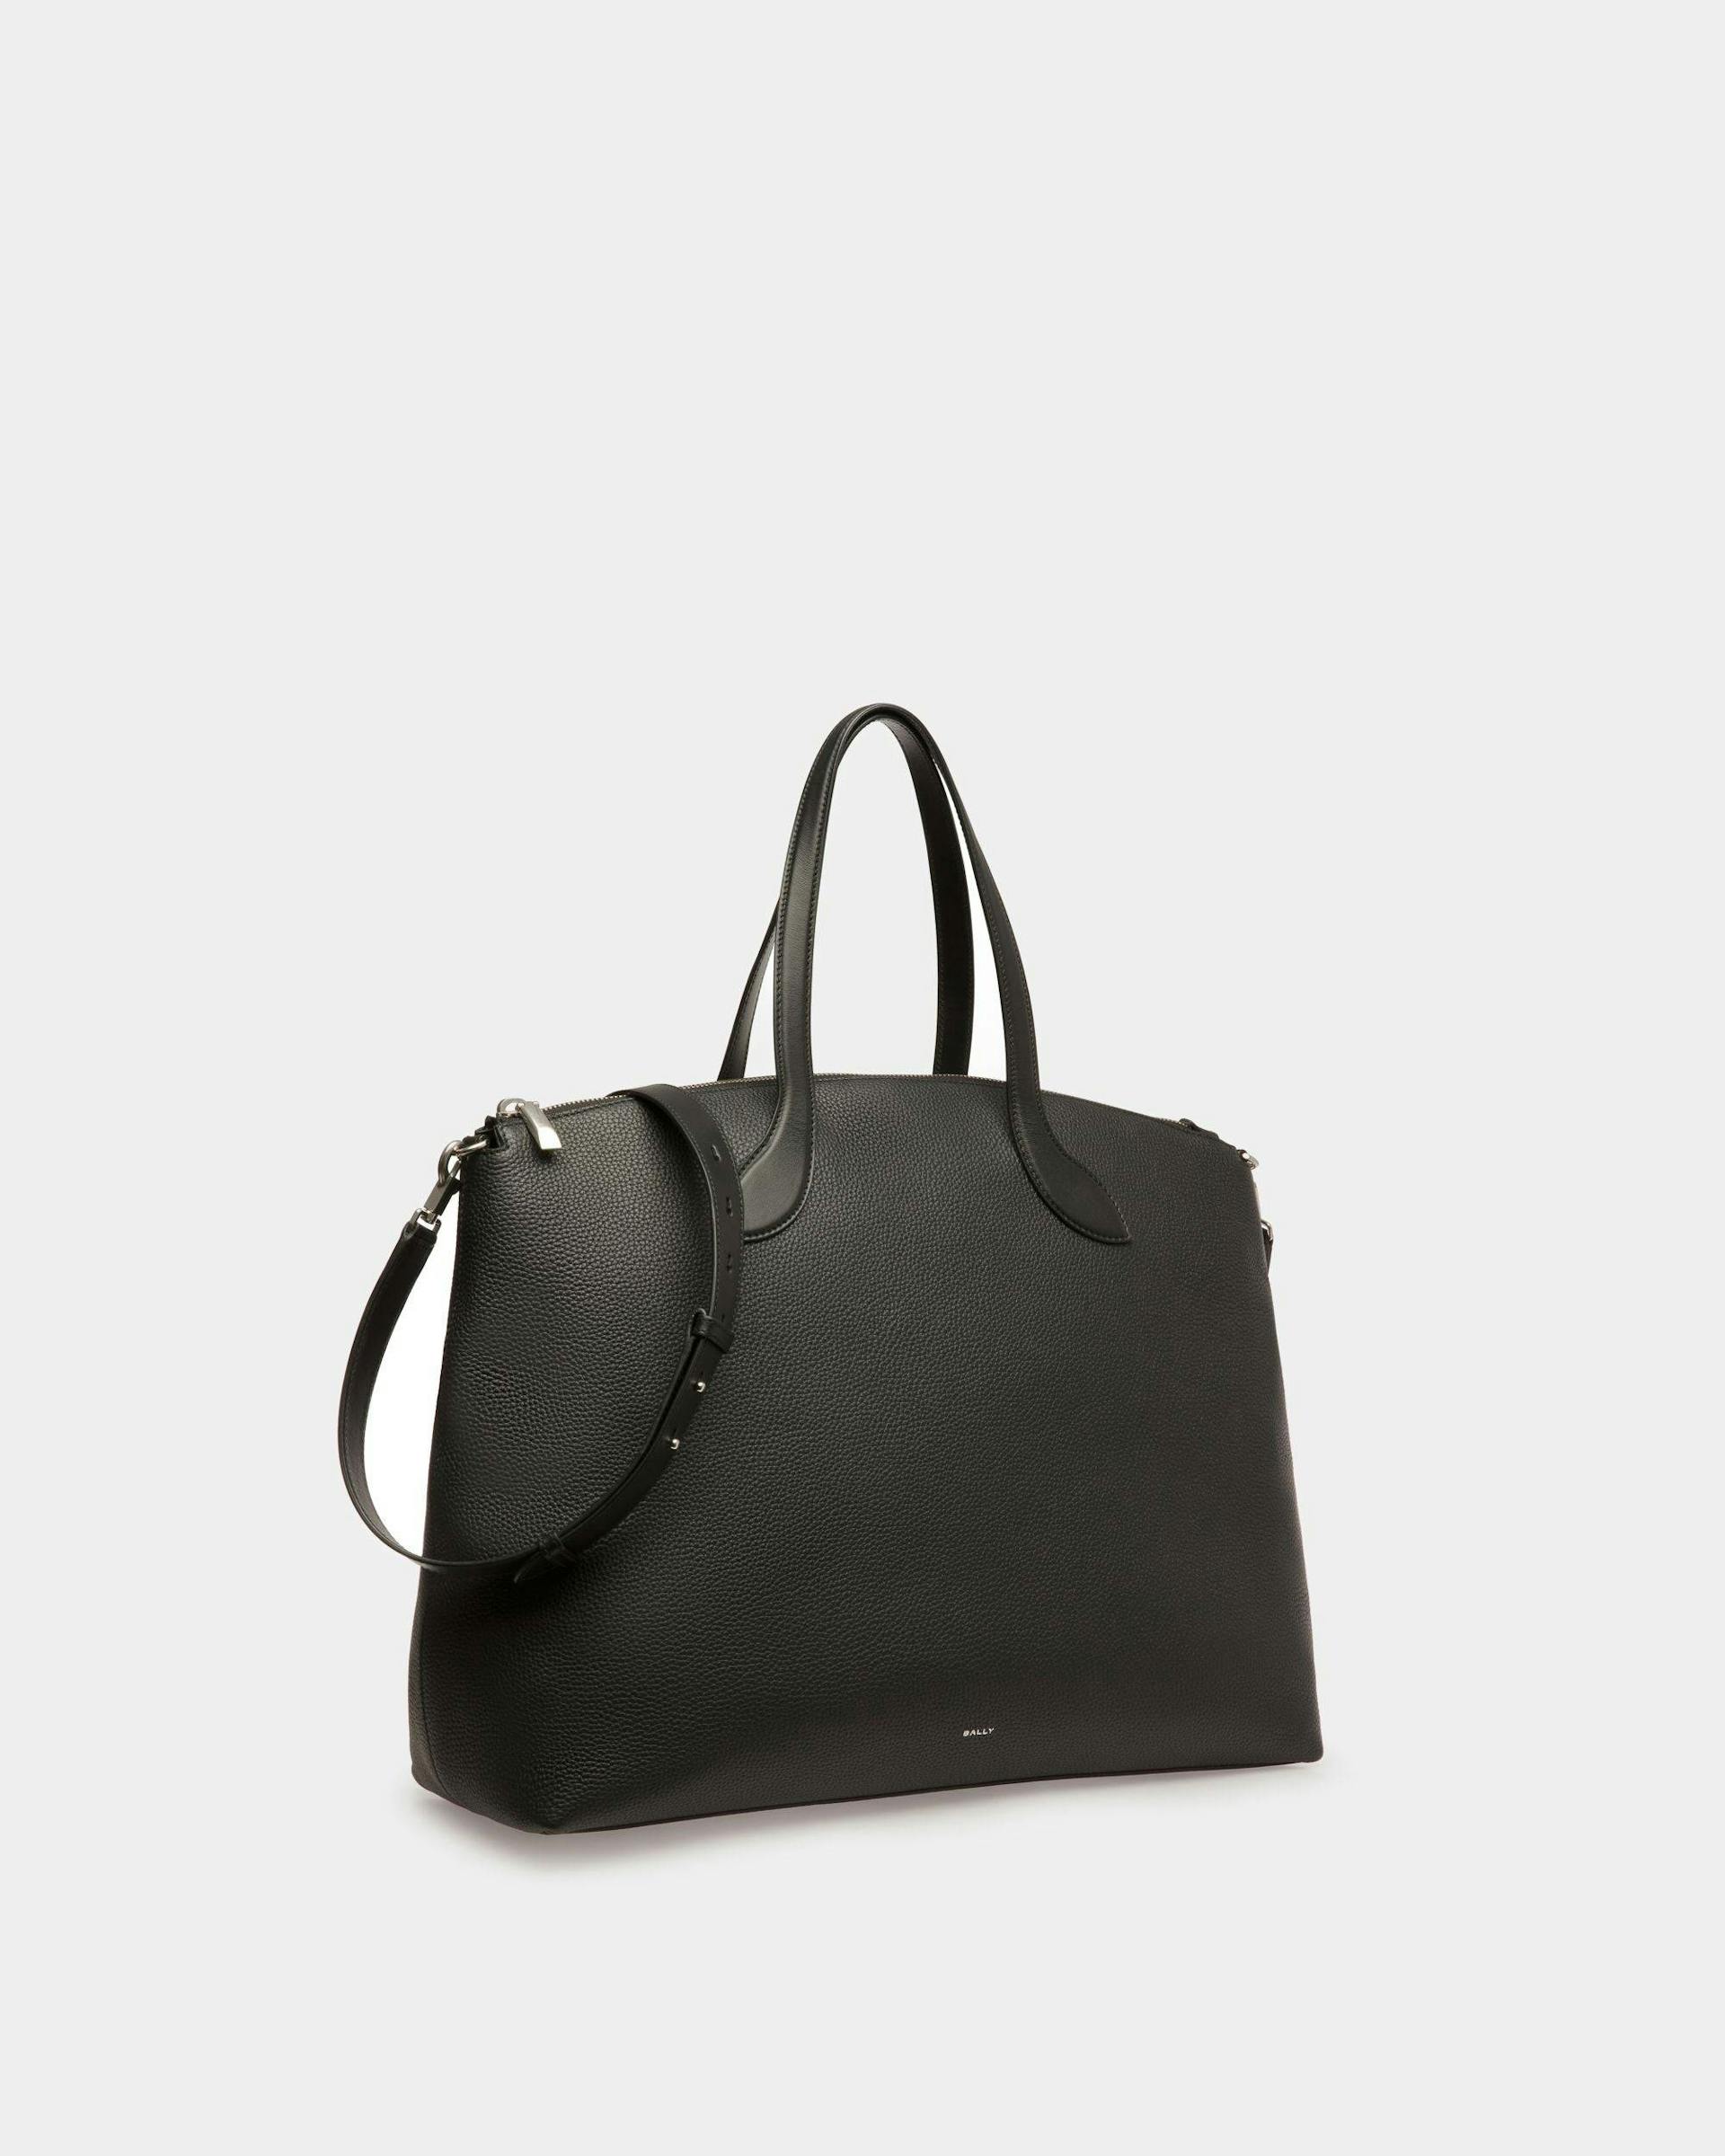 Men's Lago Tote Bag In Black Leather | Bally | Still Life 3/4 Front